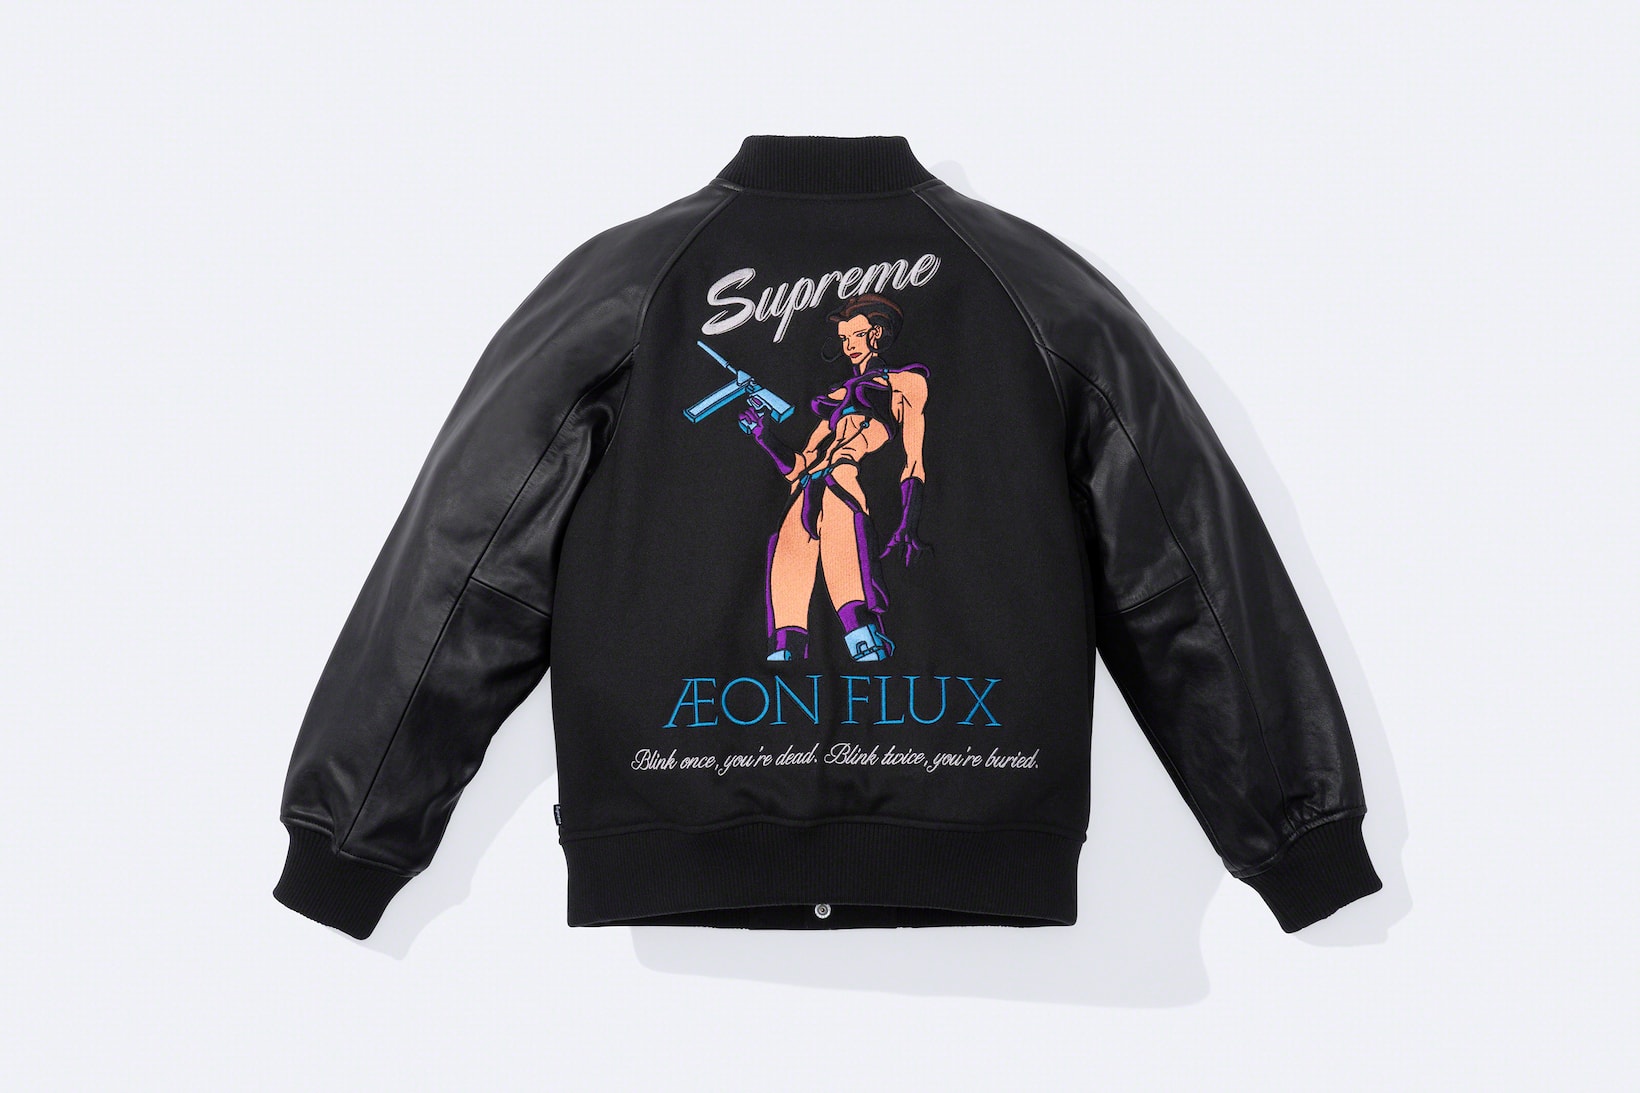 Aeon Flux Supreme Spring 2022 Collaboration Collection Hoodies Jackets